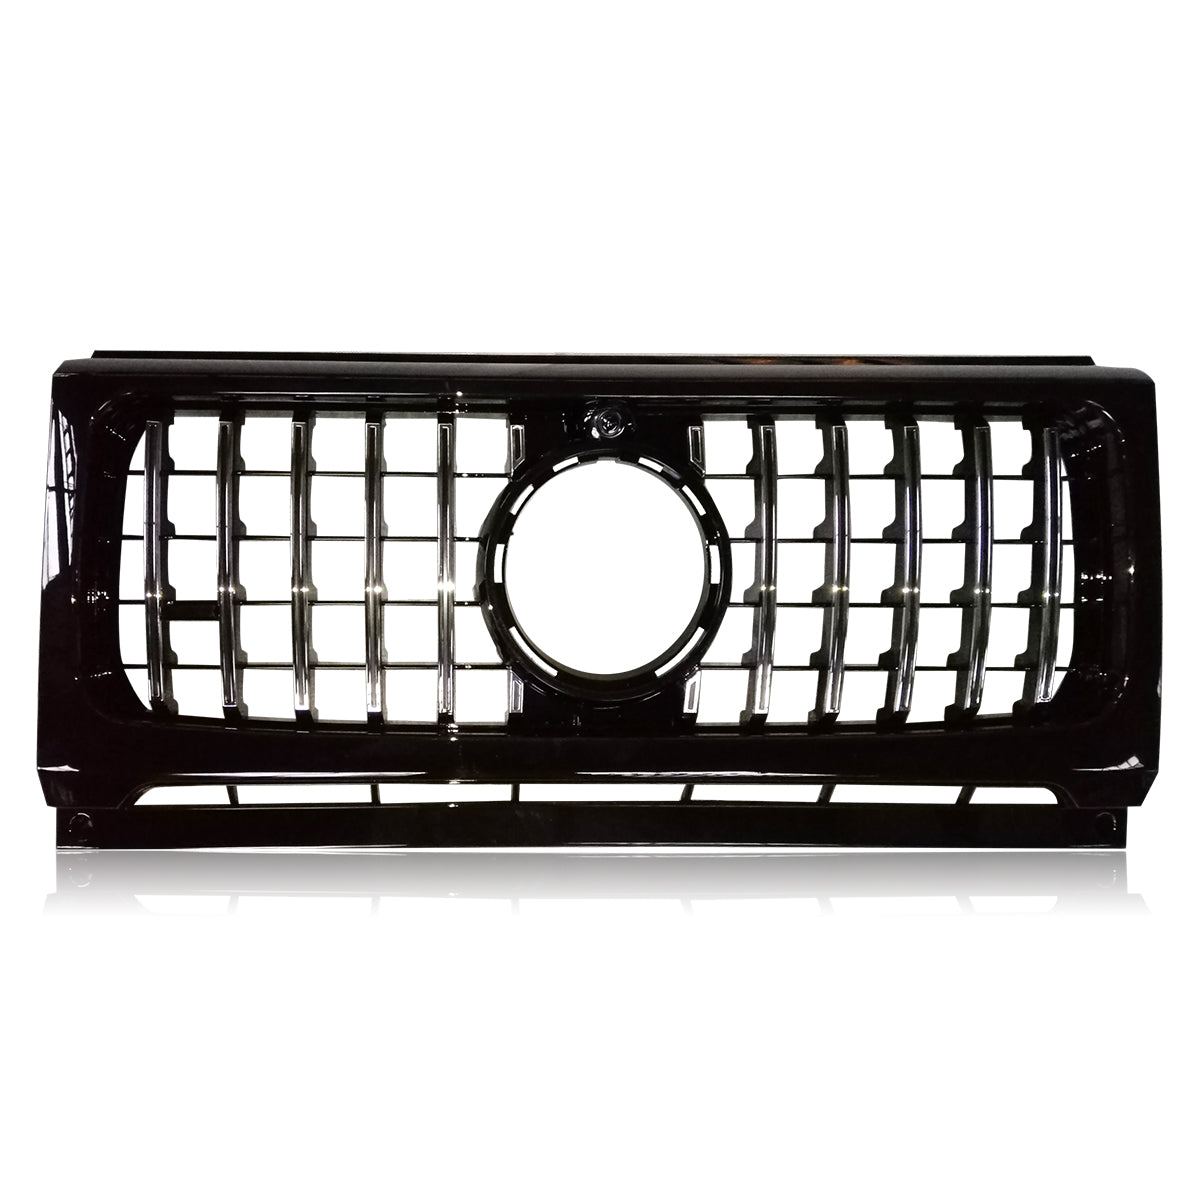 GRILLE FOR G-CLASS W463 02-18 UPGRADE TO 2019